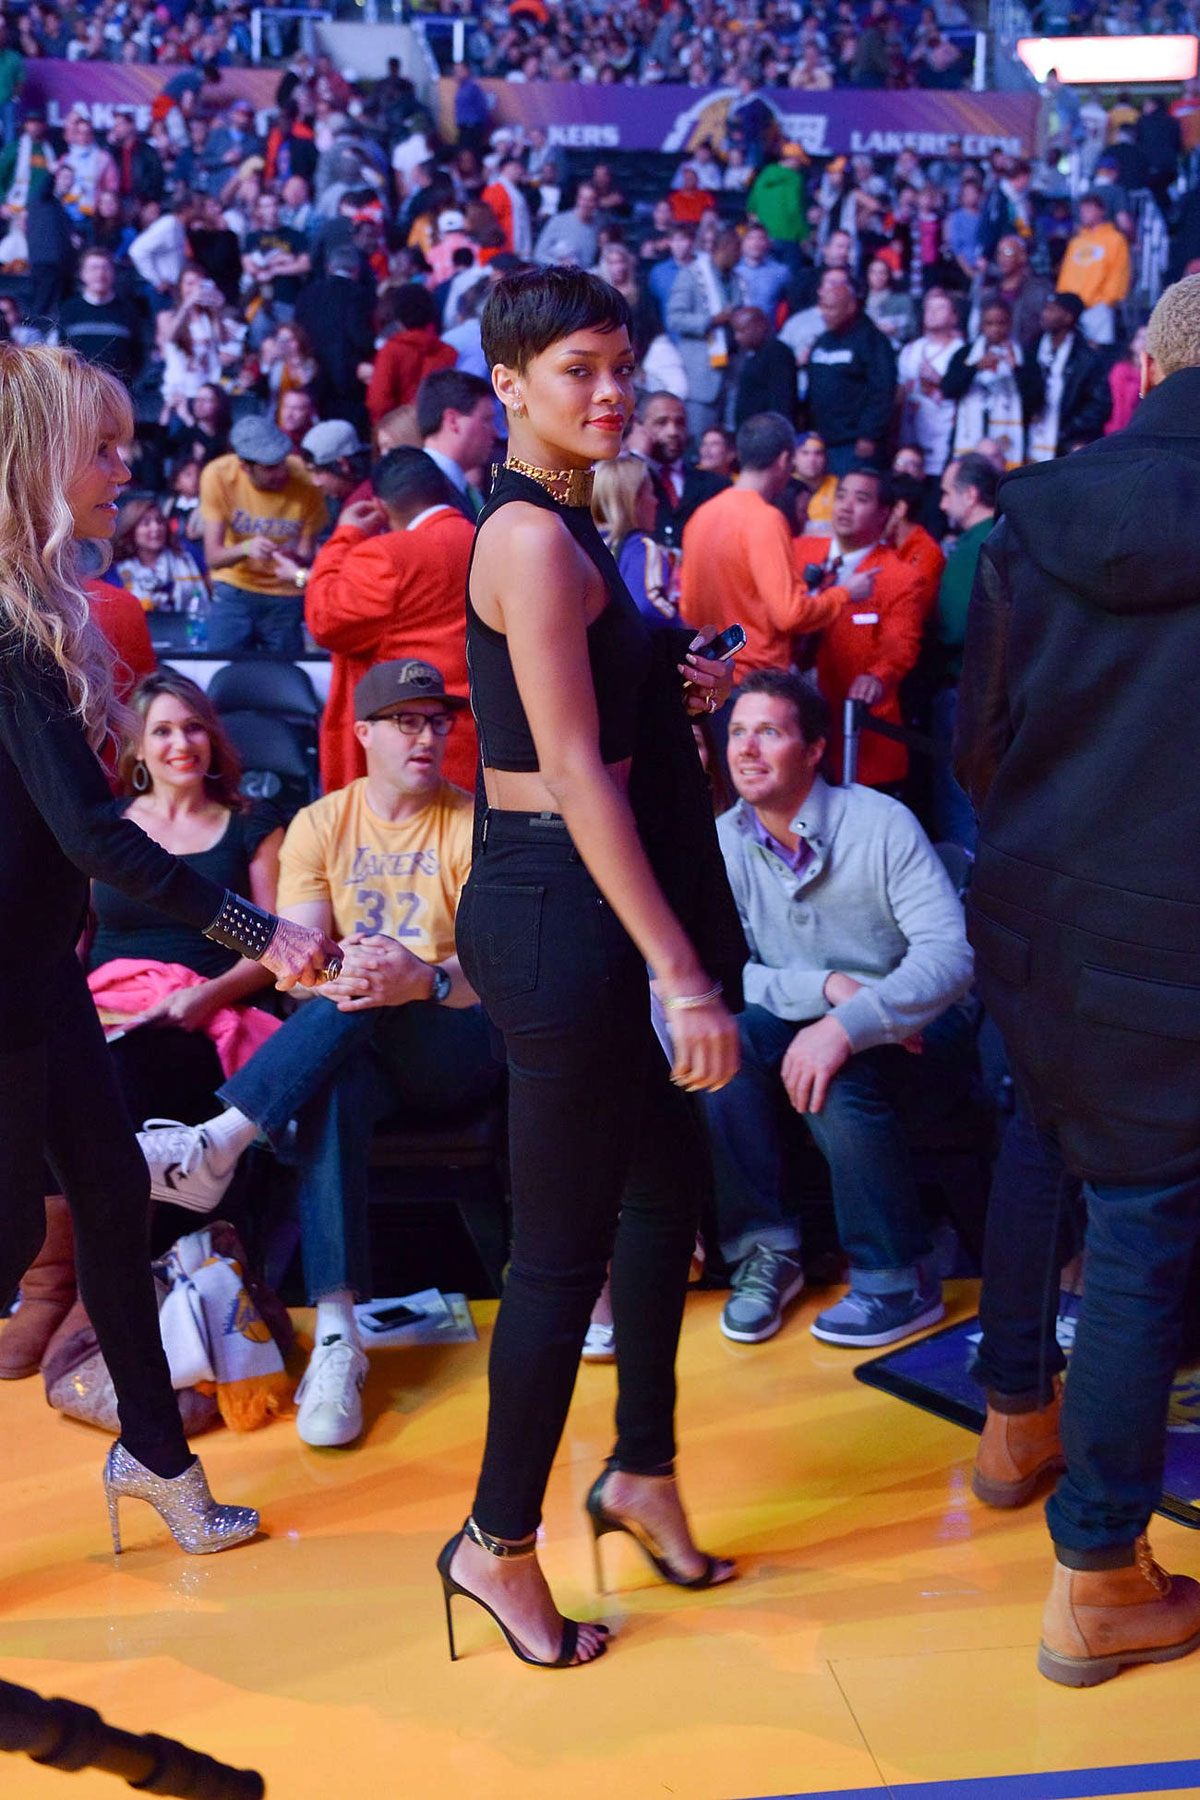 RIHANNA and Chris Brown at New York Knicks vs Los Angeles Lakers Game in Los Angeles ...1200 x 1800